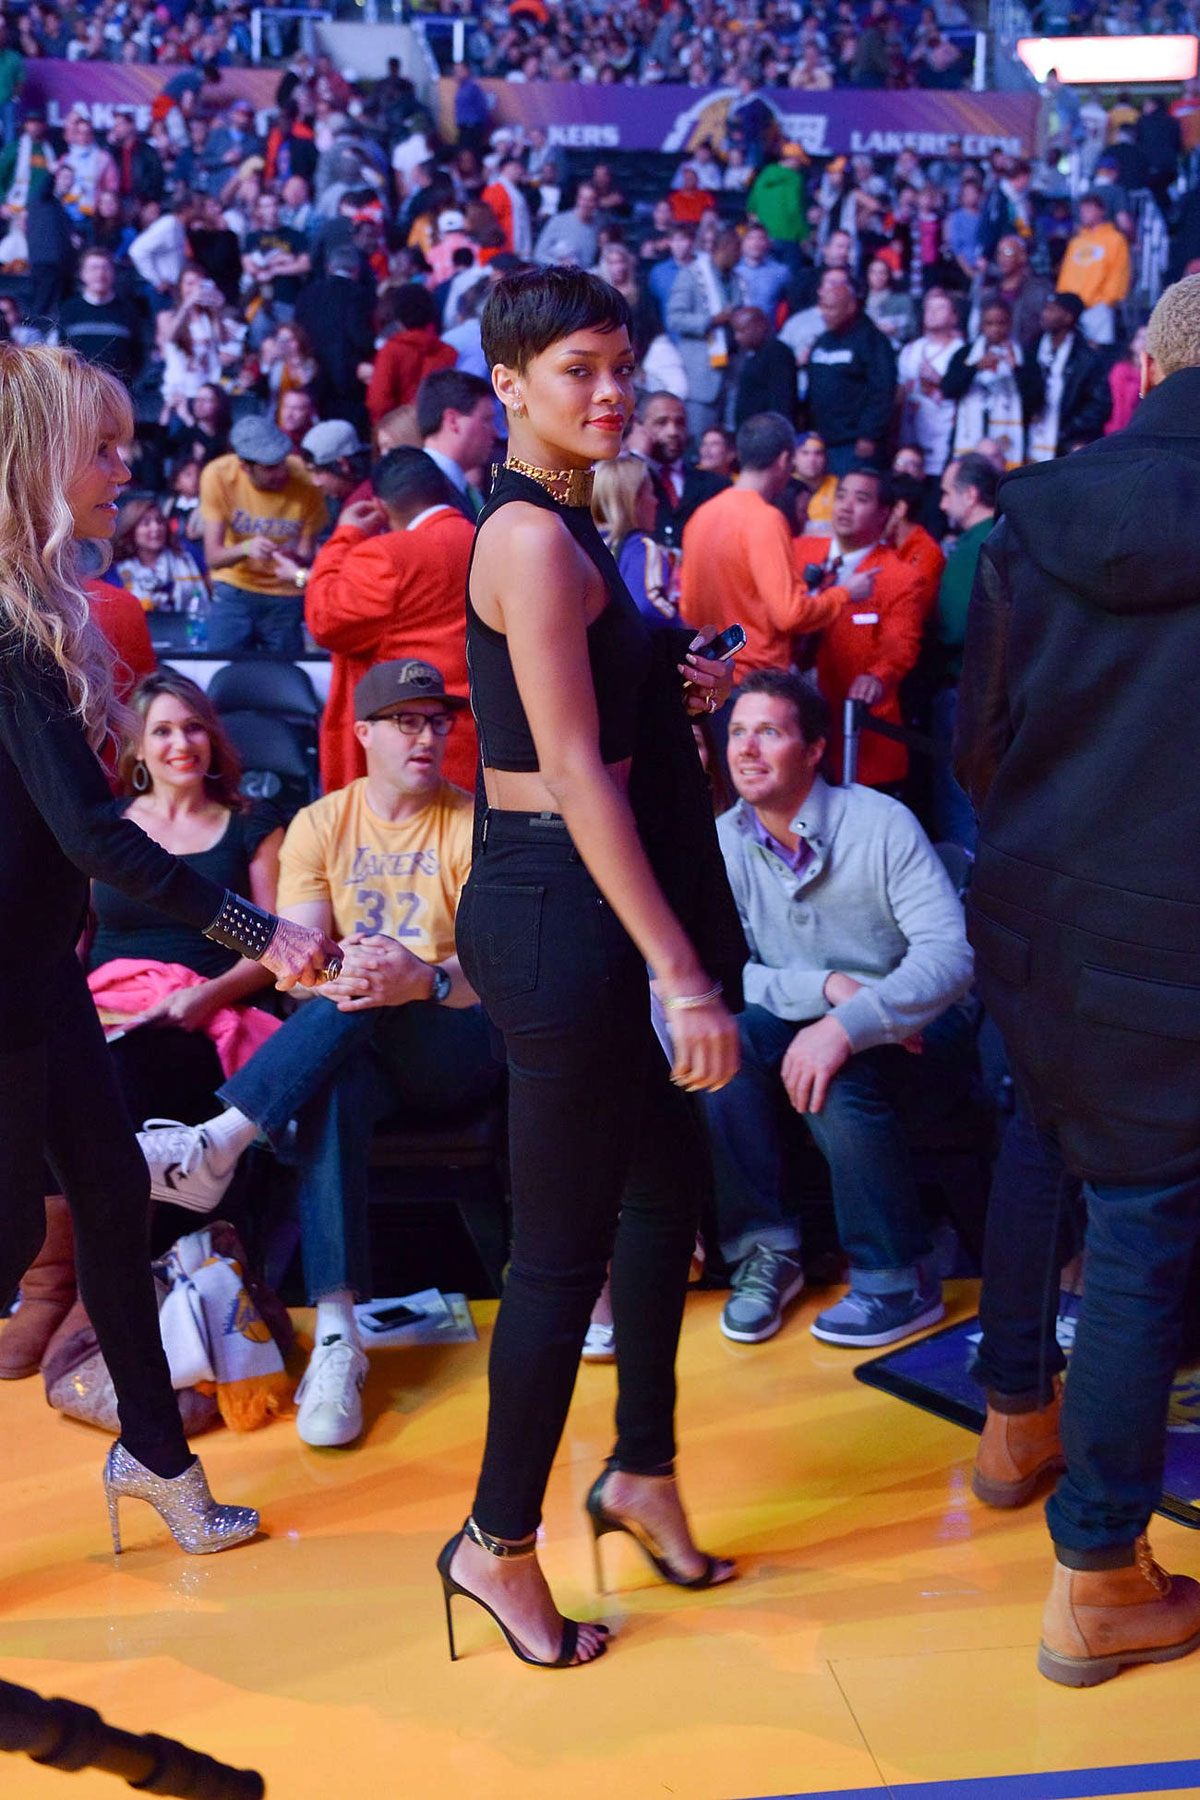 RIHANNA and Chris Brown at New York Knicks vs Los Angeles Lakers Game in Los Angeles ...1200 x 1800